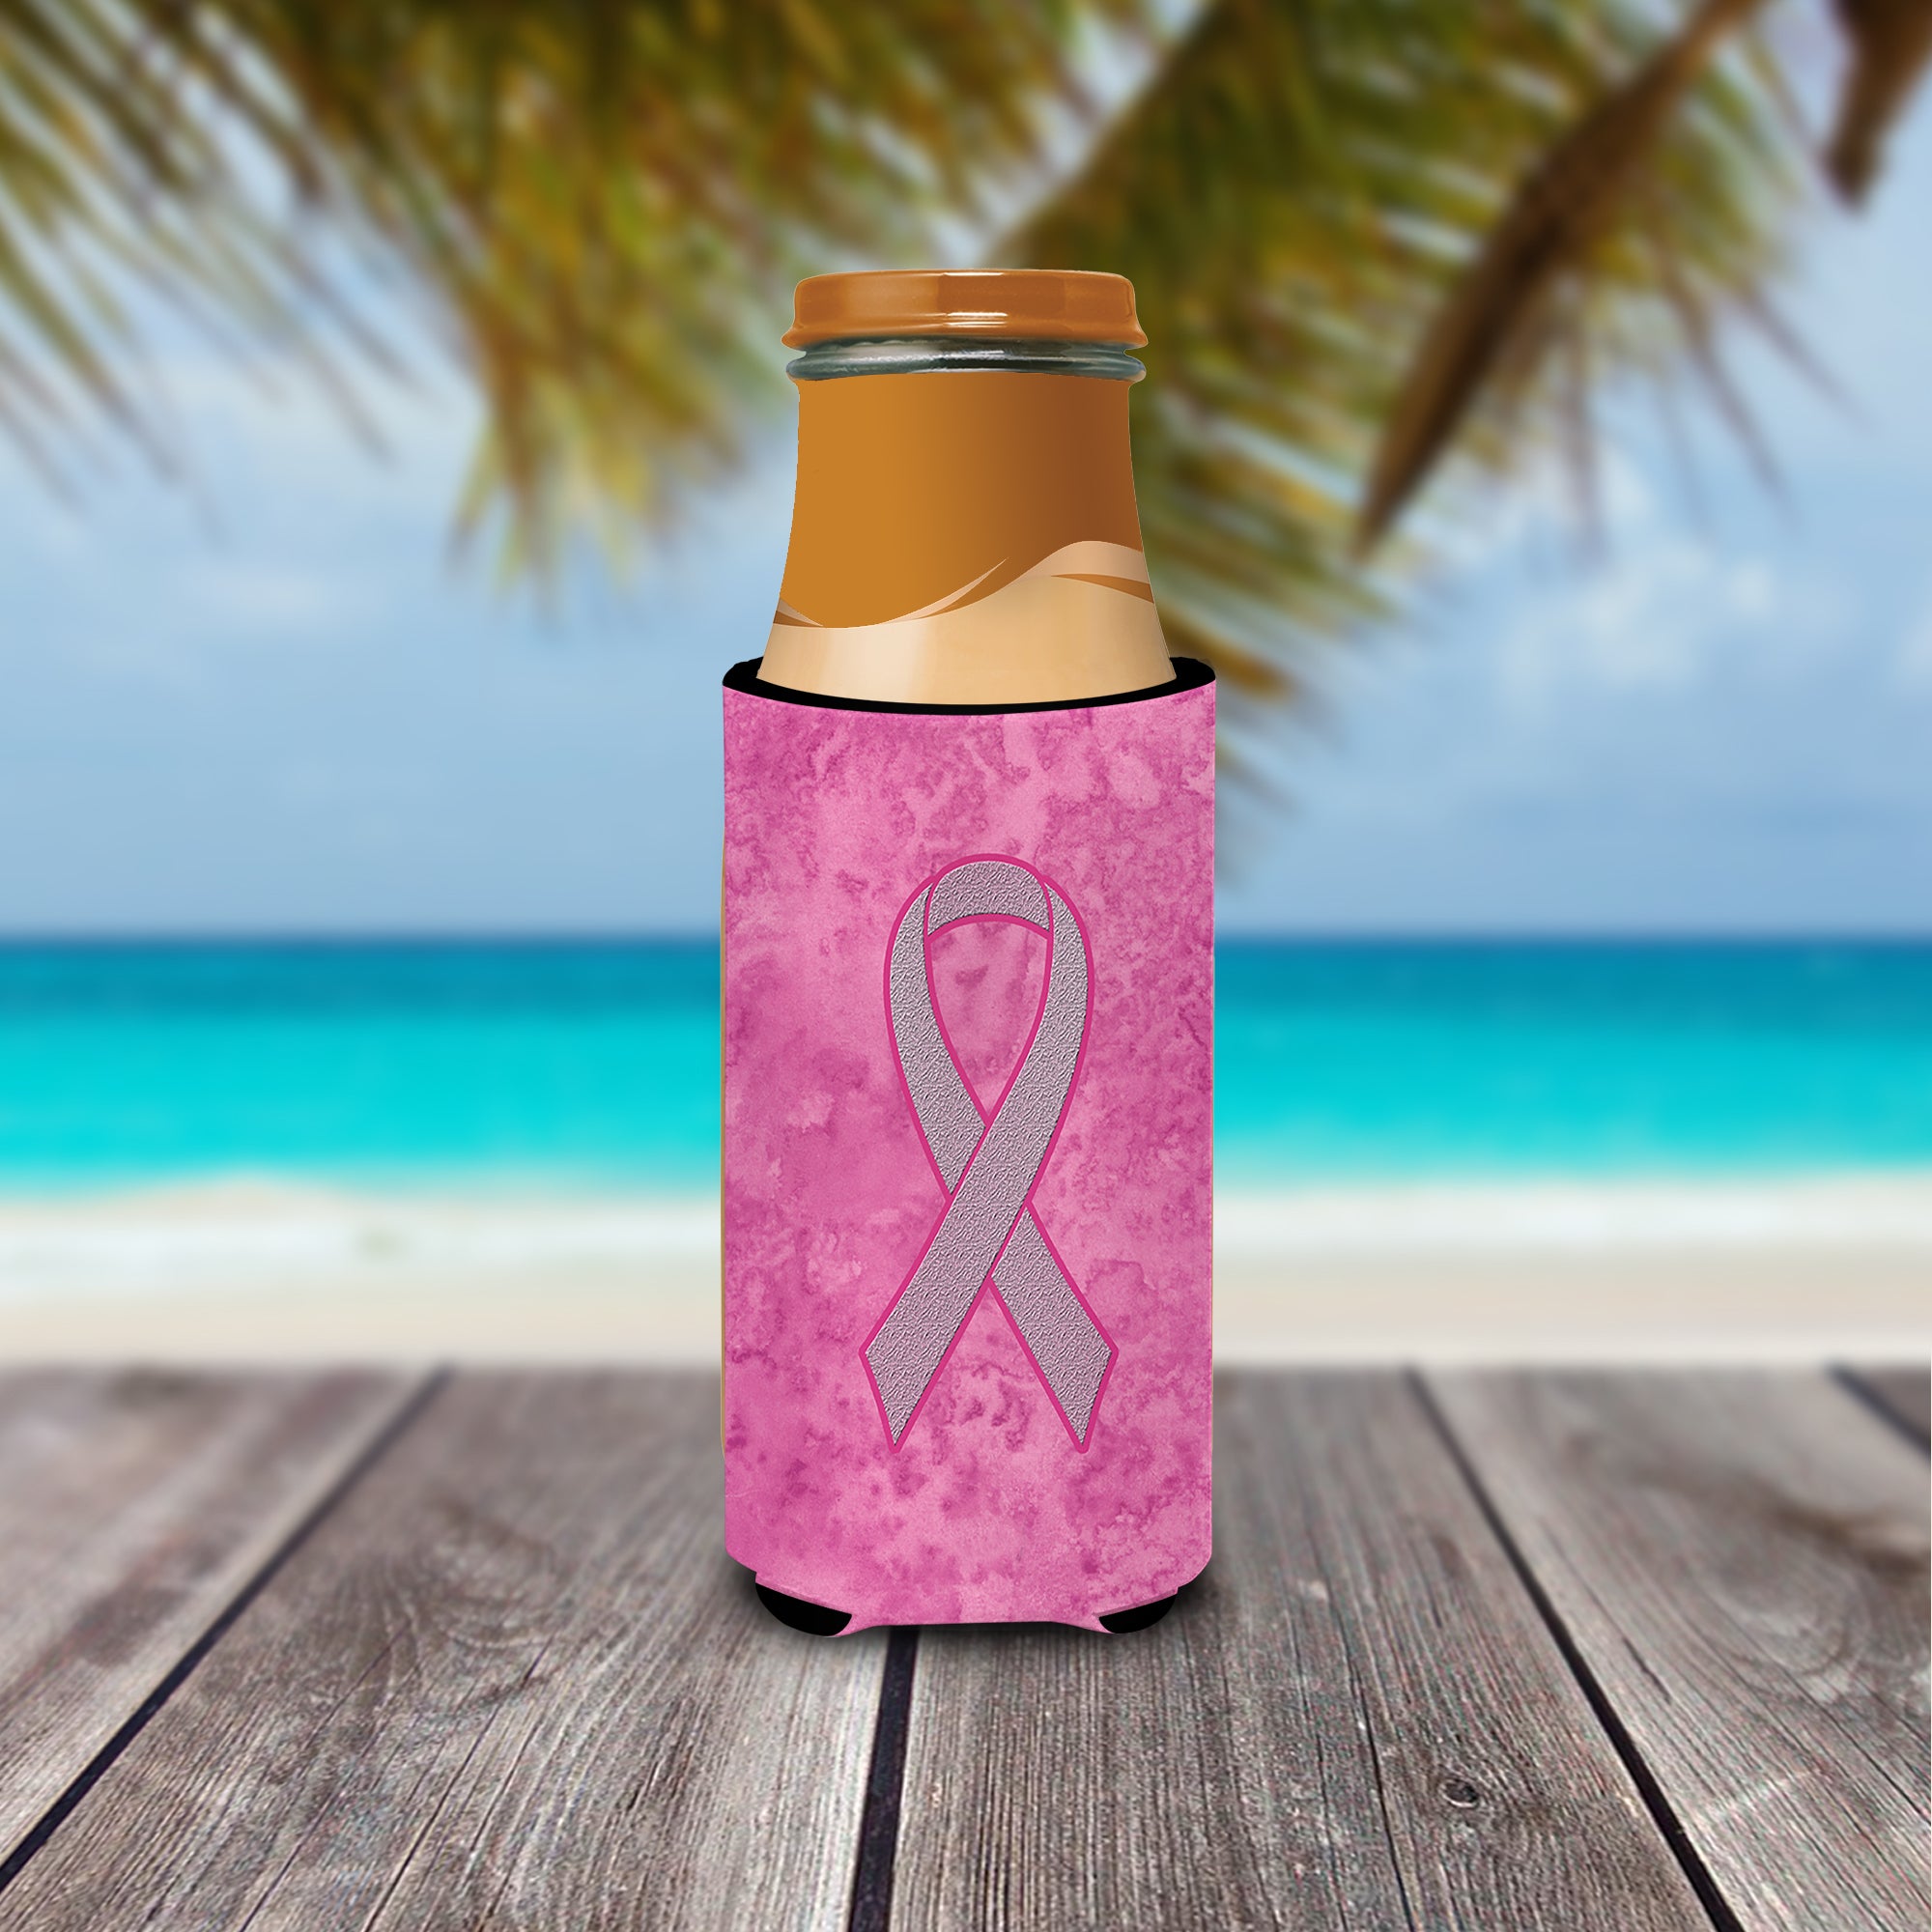 Pink Ribbon for Breast Cancer Awareness Ultra Beverage Insulators for slim cans AN1205MUK